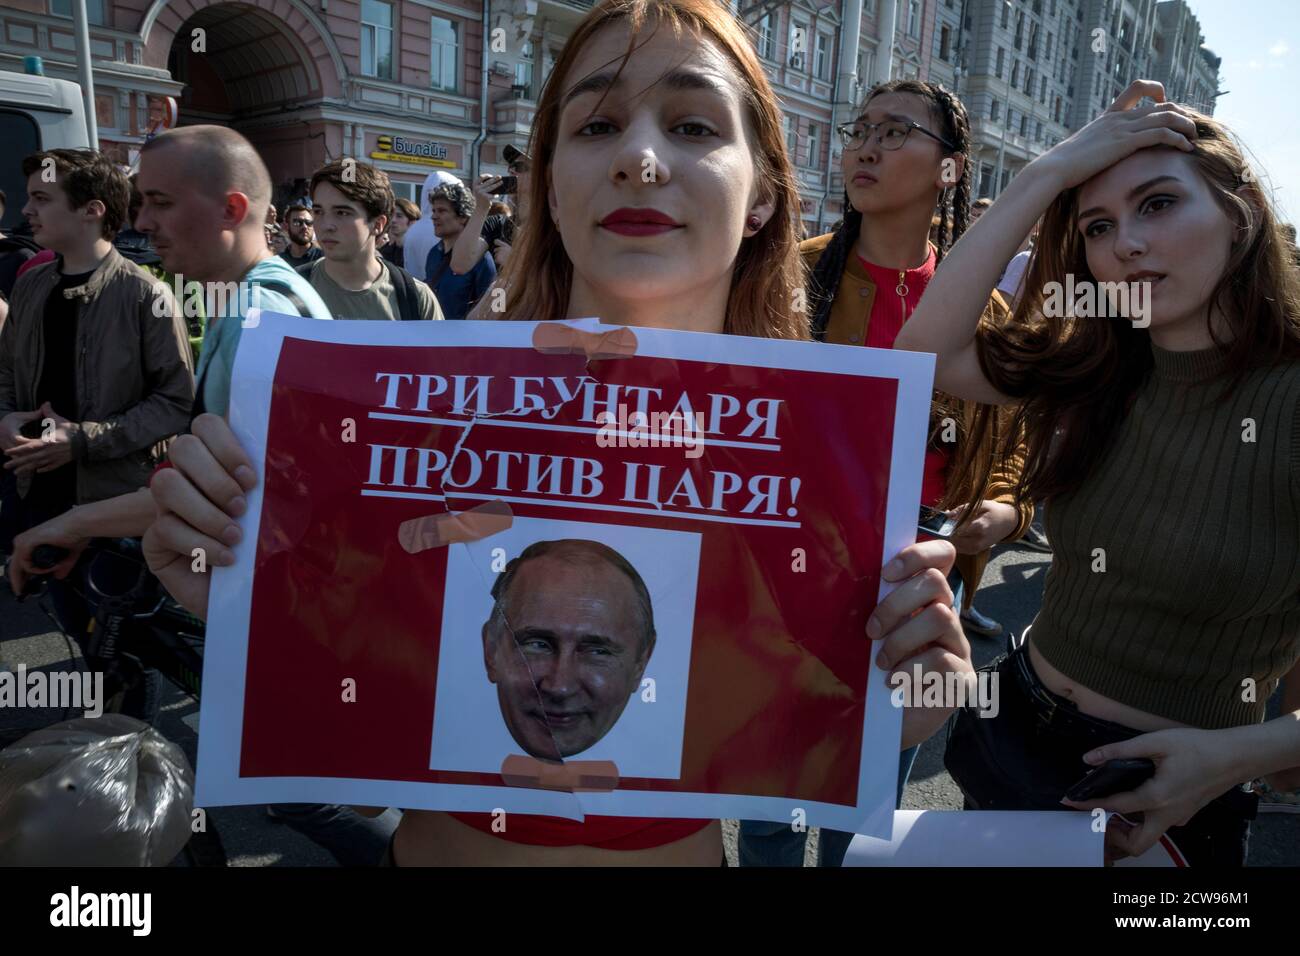 Moscow, Russia. 5th May, 2018 Opposition supporters hold placards and shout slogans during an unauthorized anti-Putin rally called by opposition leader Alexei Navalny in Moscow, two days ahead of Vladimir Putin's inauguration for a fourth Kremlin term. The banner reads 'Three rebels against the king' Stock Photo